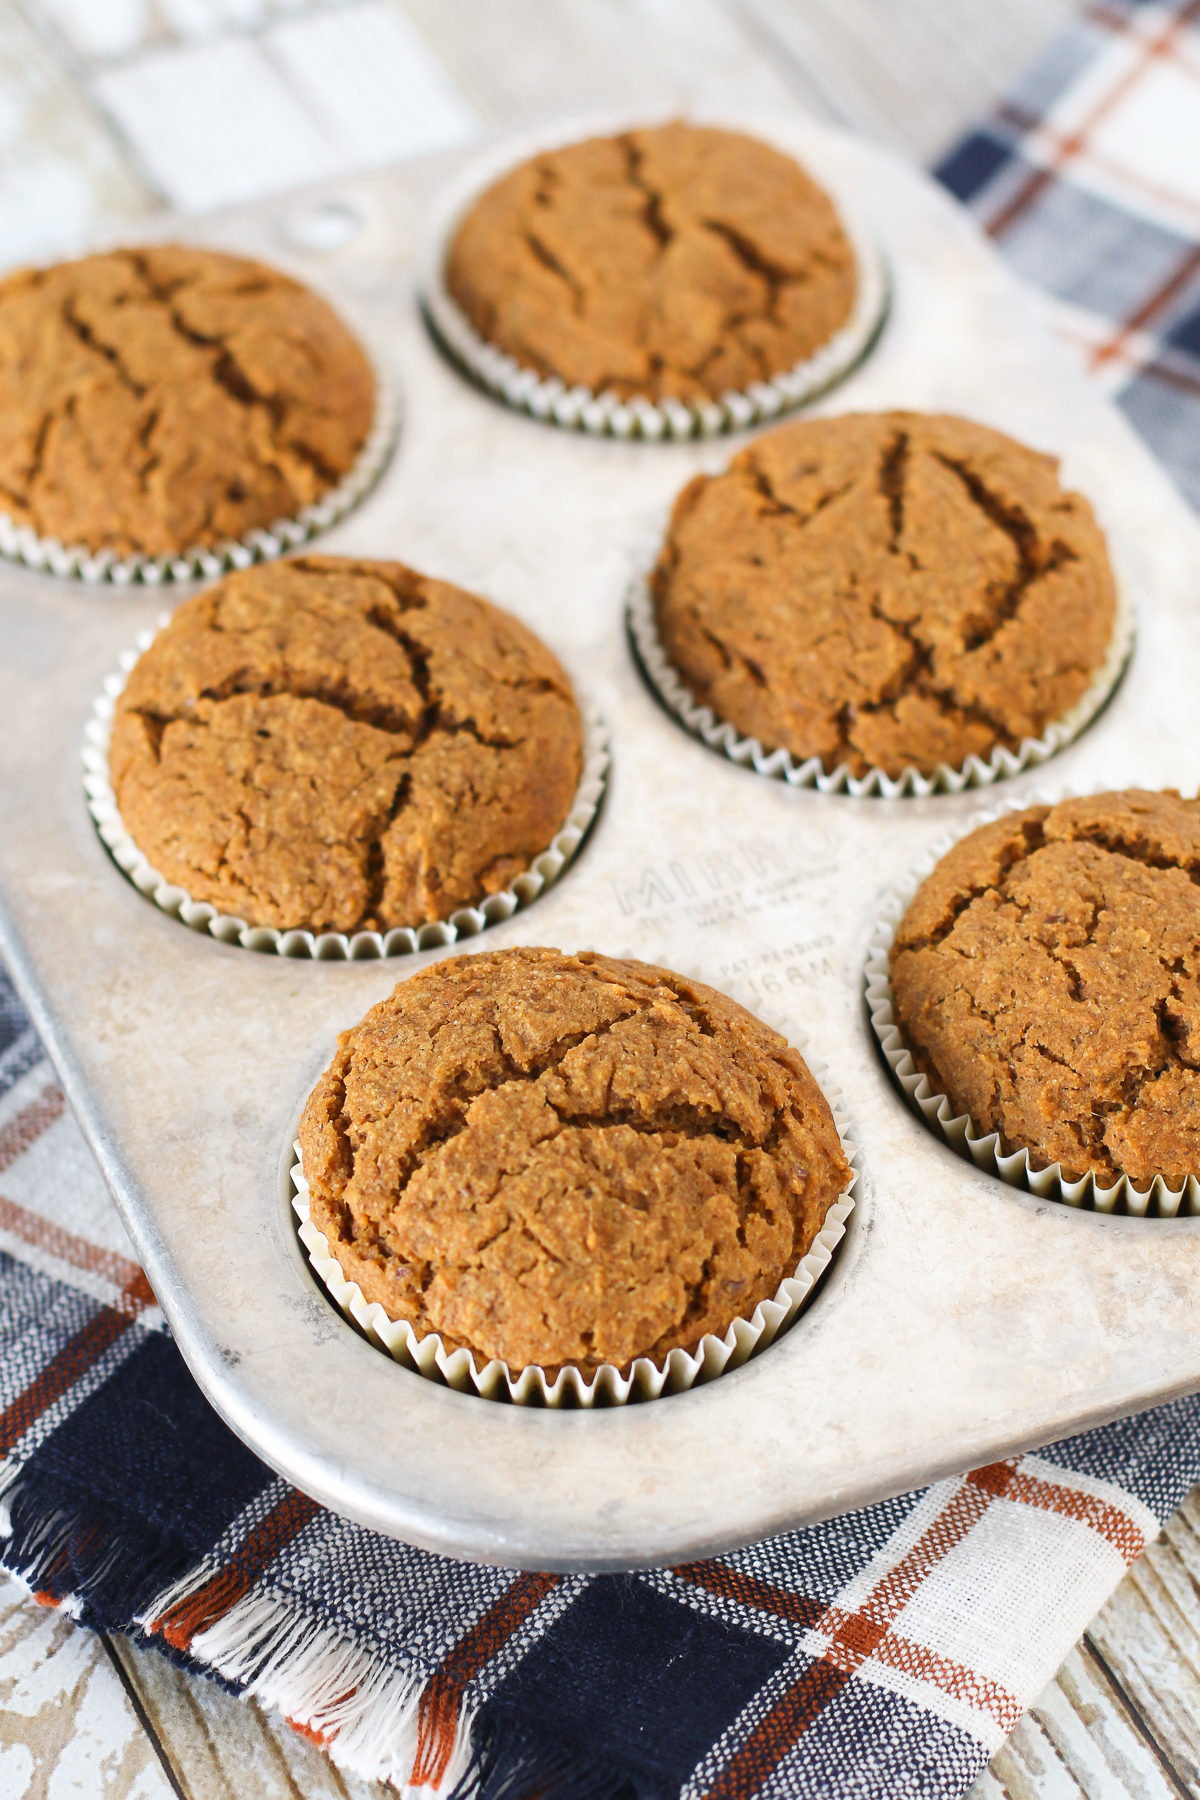 Gluten Free Vegan Pumpkin Spice Muffins. These naturally sweetened pumpkin muffins have all the warm spices we love. They are fall-tastic!